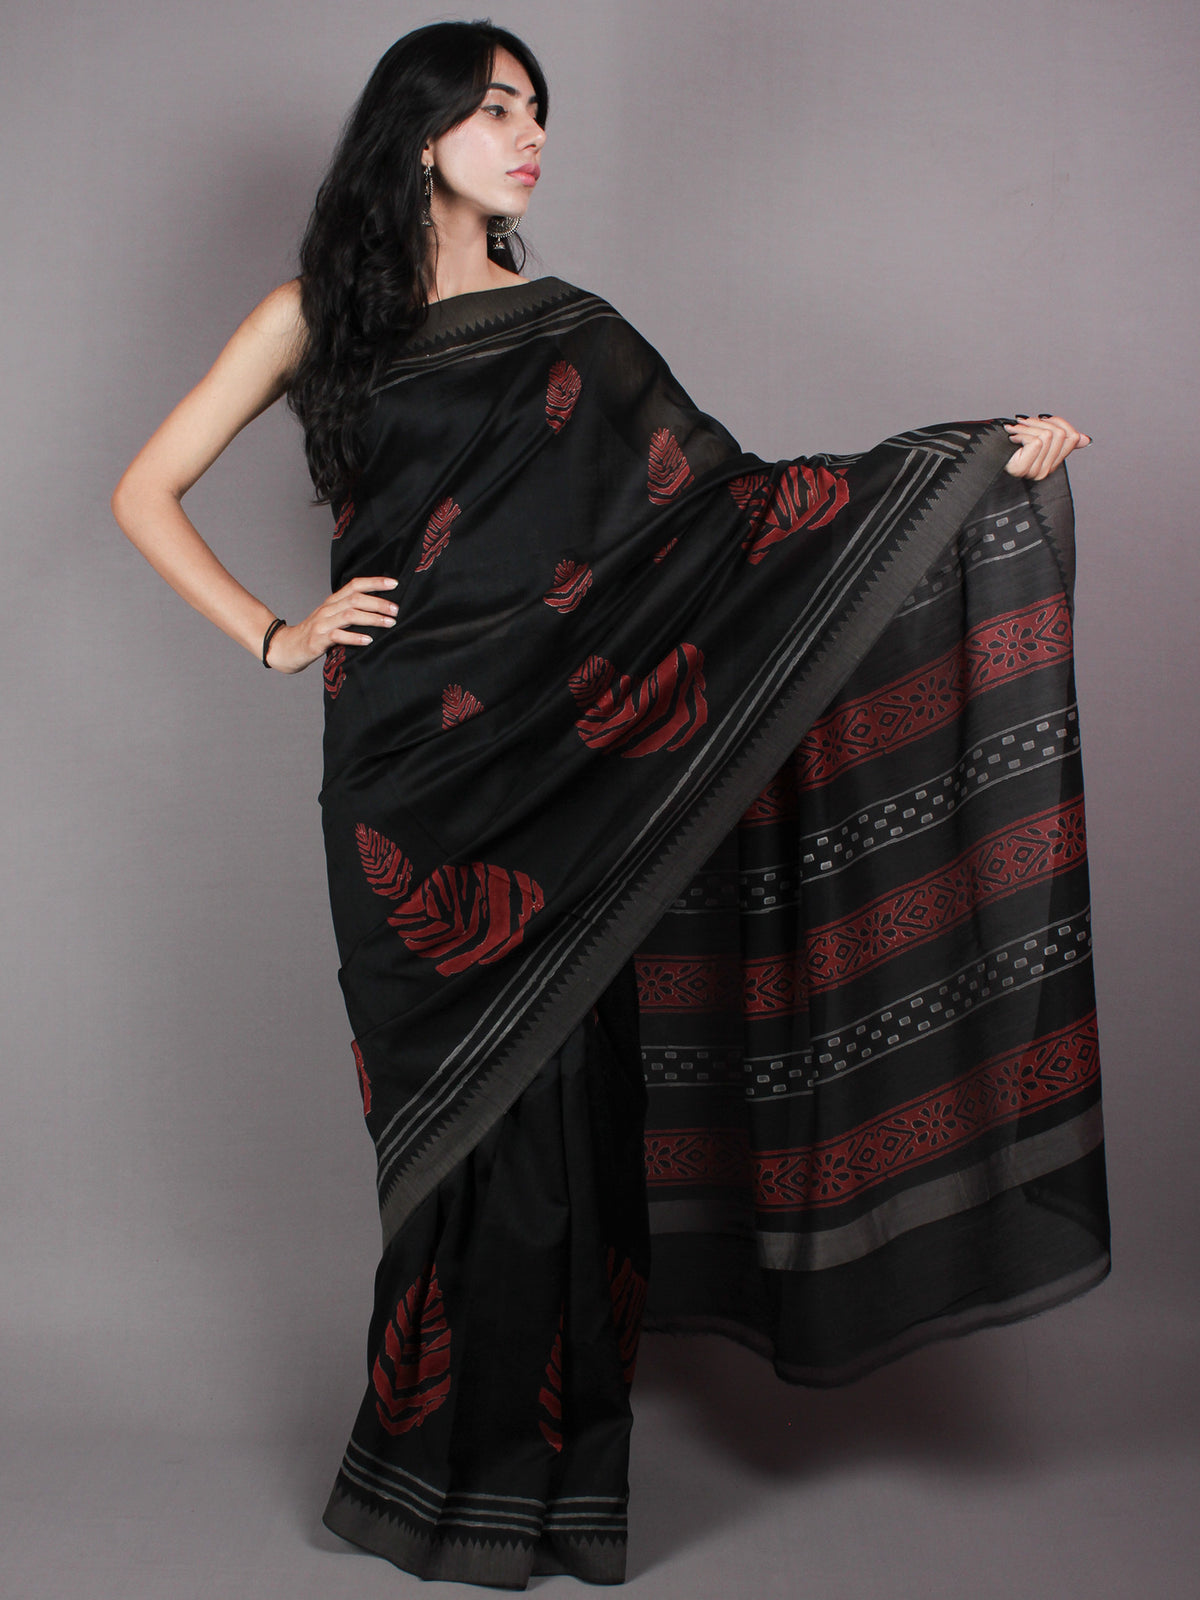 Black Red Hand Block Printed in Natural Vegetable Colors Chanderi Saree With Geecha Border - S03170375